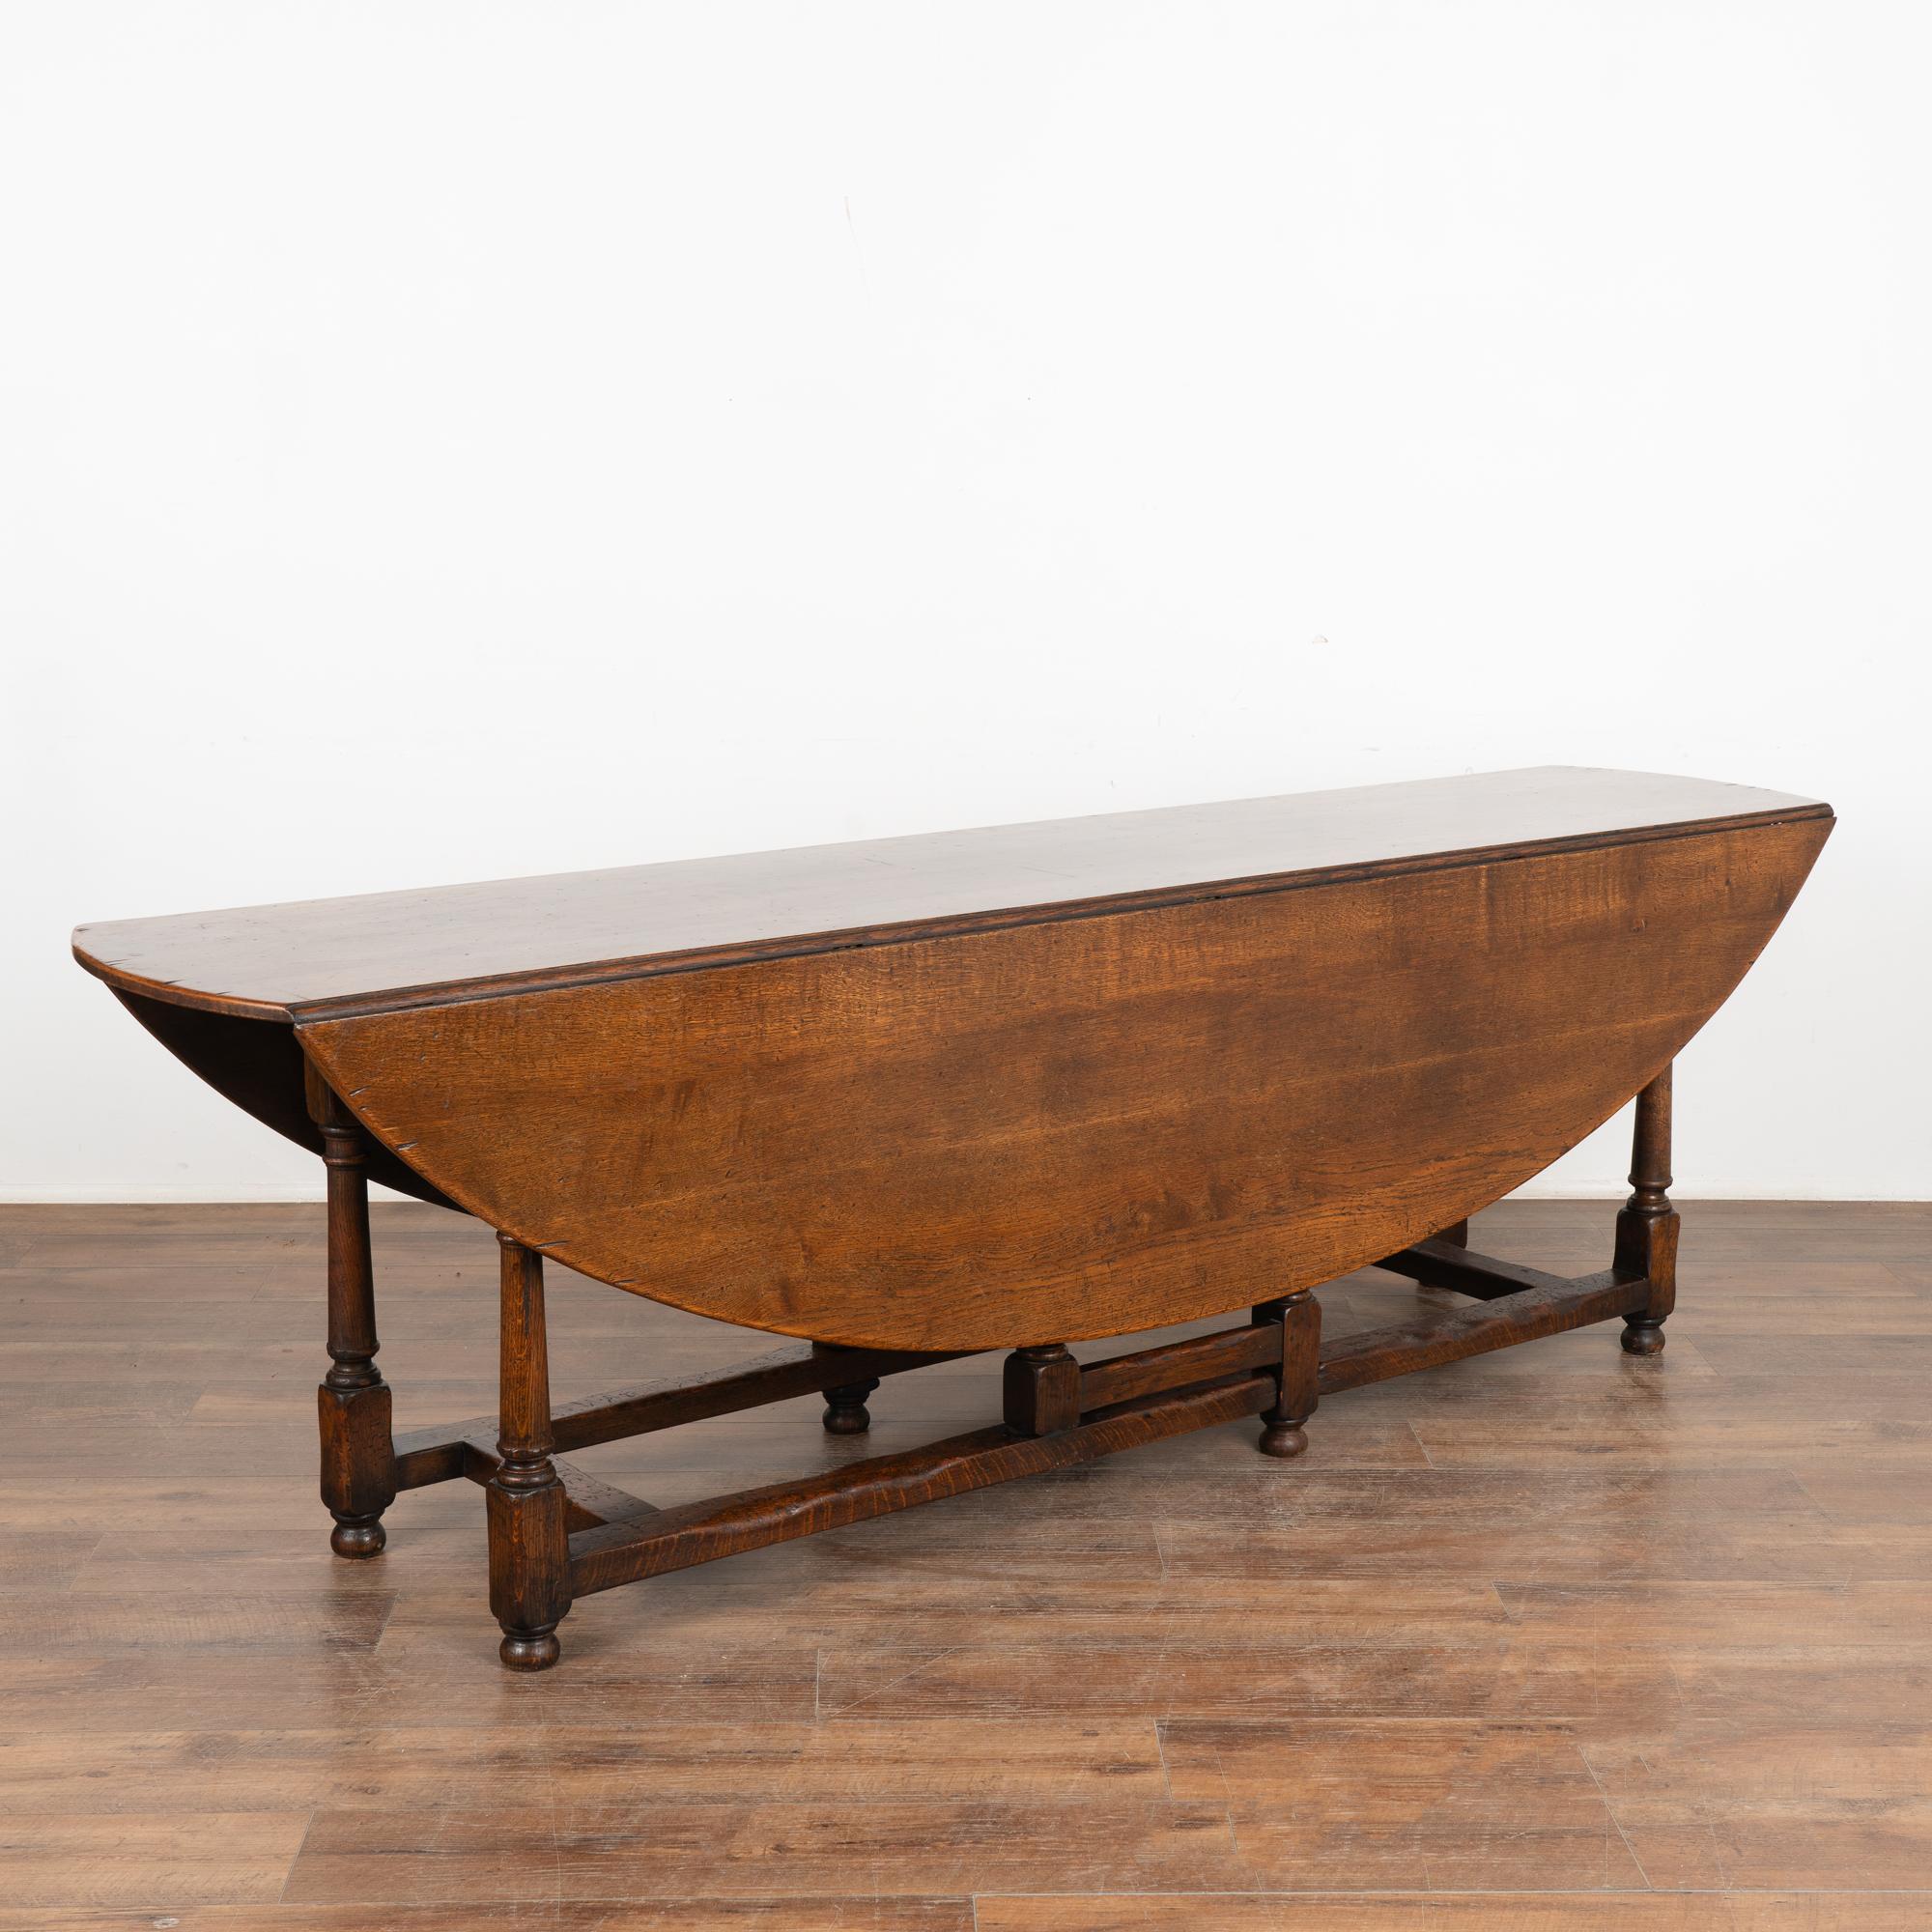 This handsome gateleg dining table is also known as an English wake table with drop leaves.
Notice the dark patina of the oak, aged and naturally distressed over generations of use and lovely turned legs.
The large oval shaped top has 2 drop leaves,